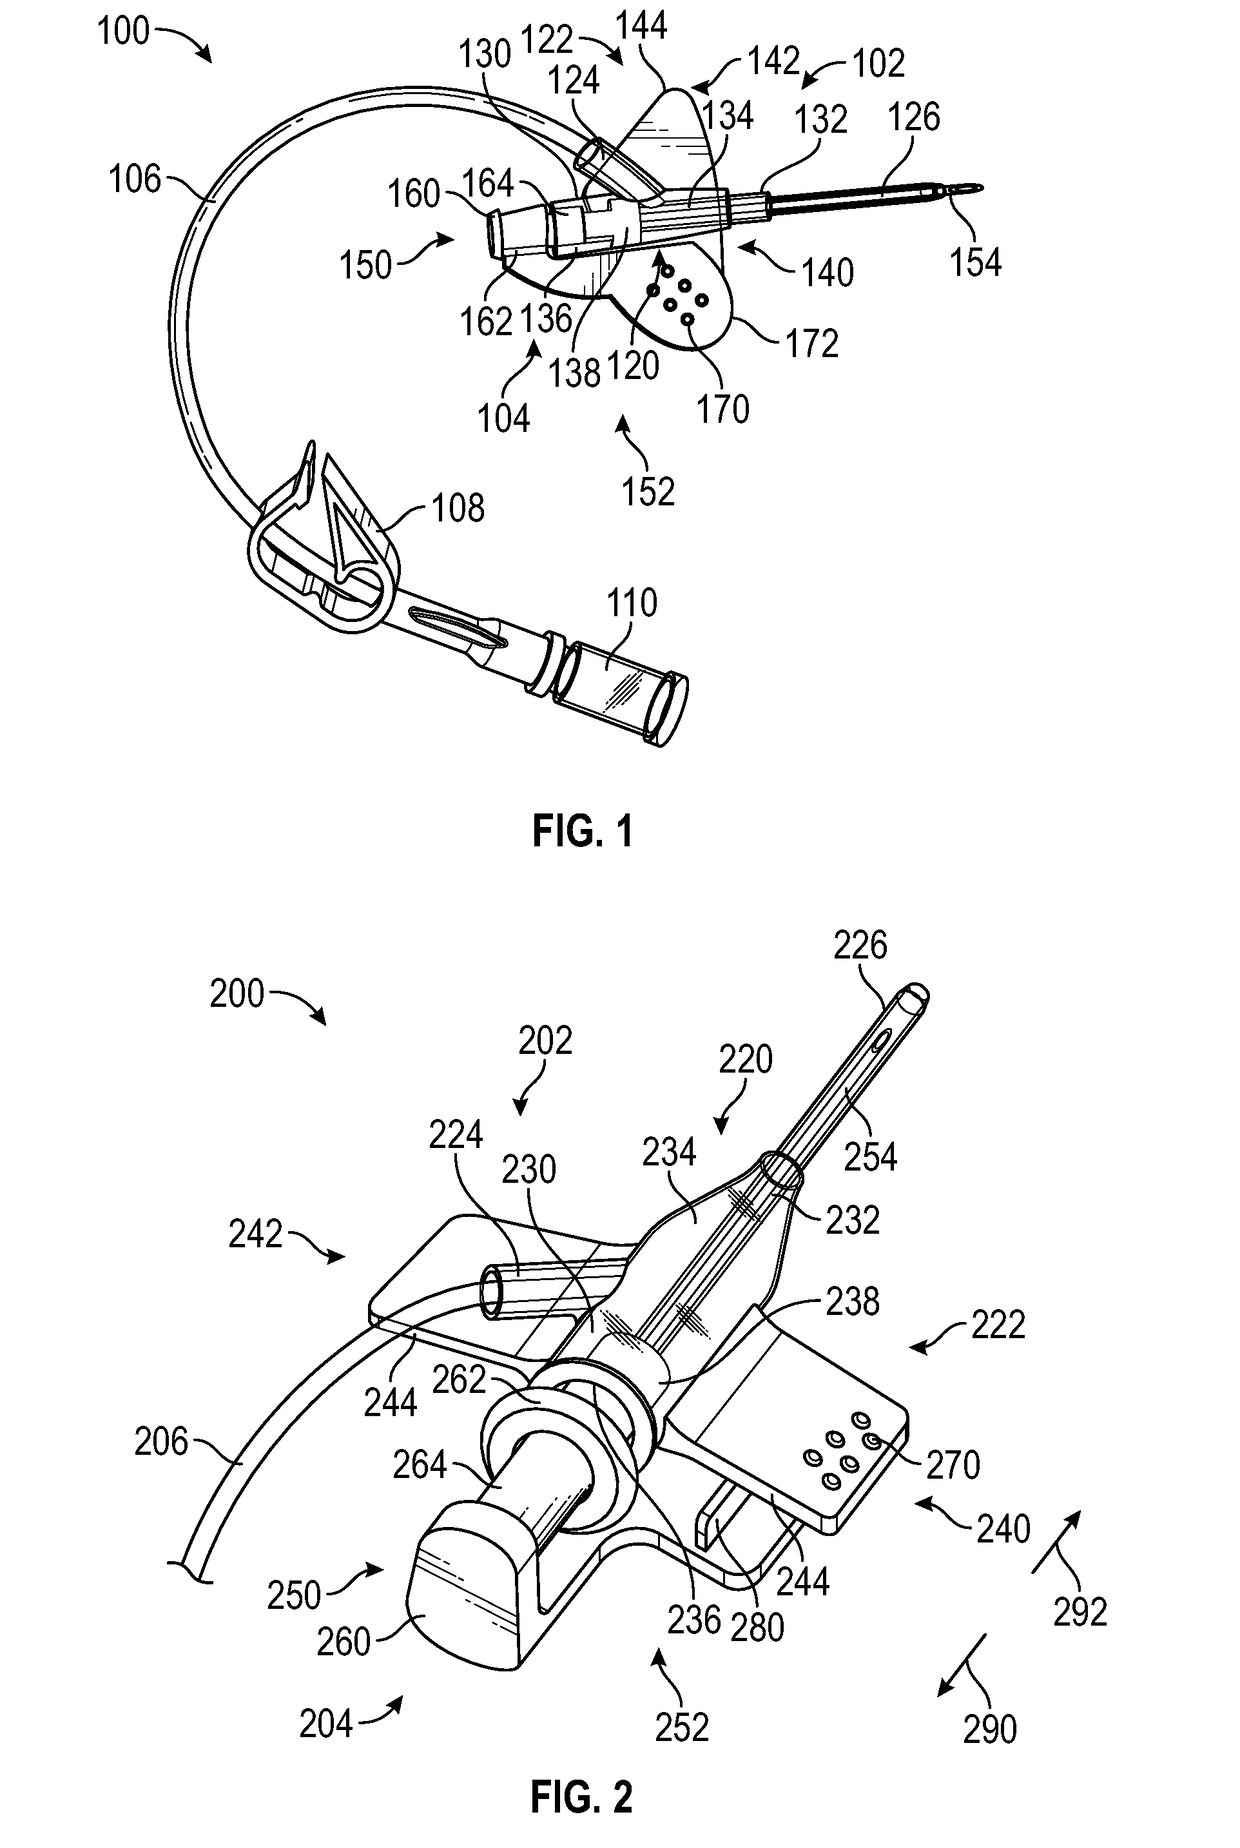 Ergonomic iv systems and methods